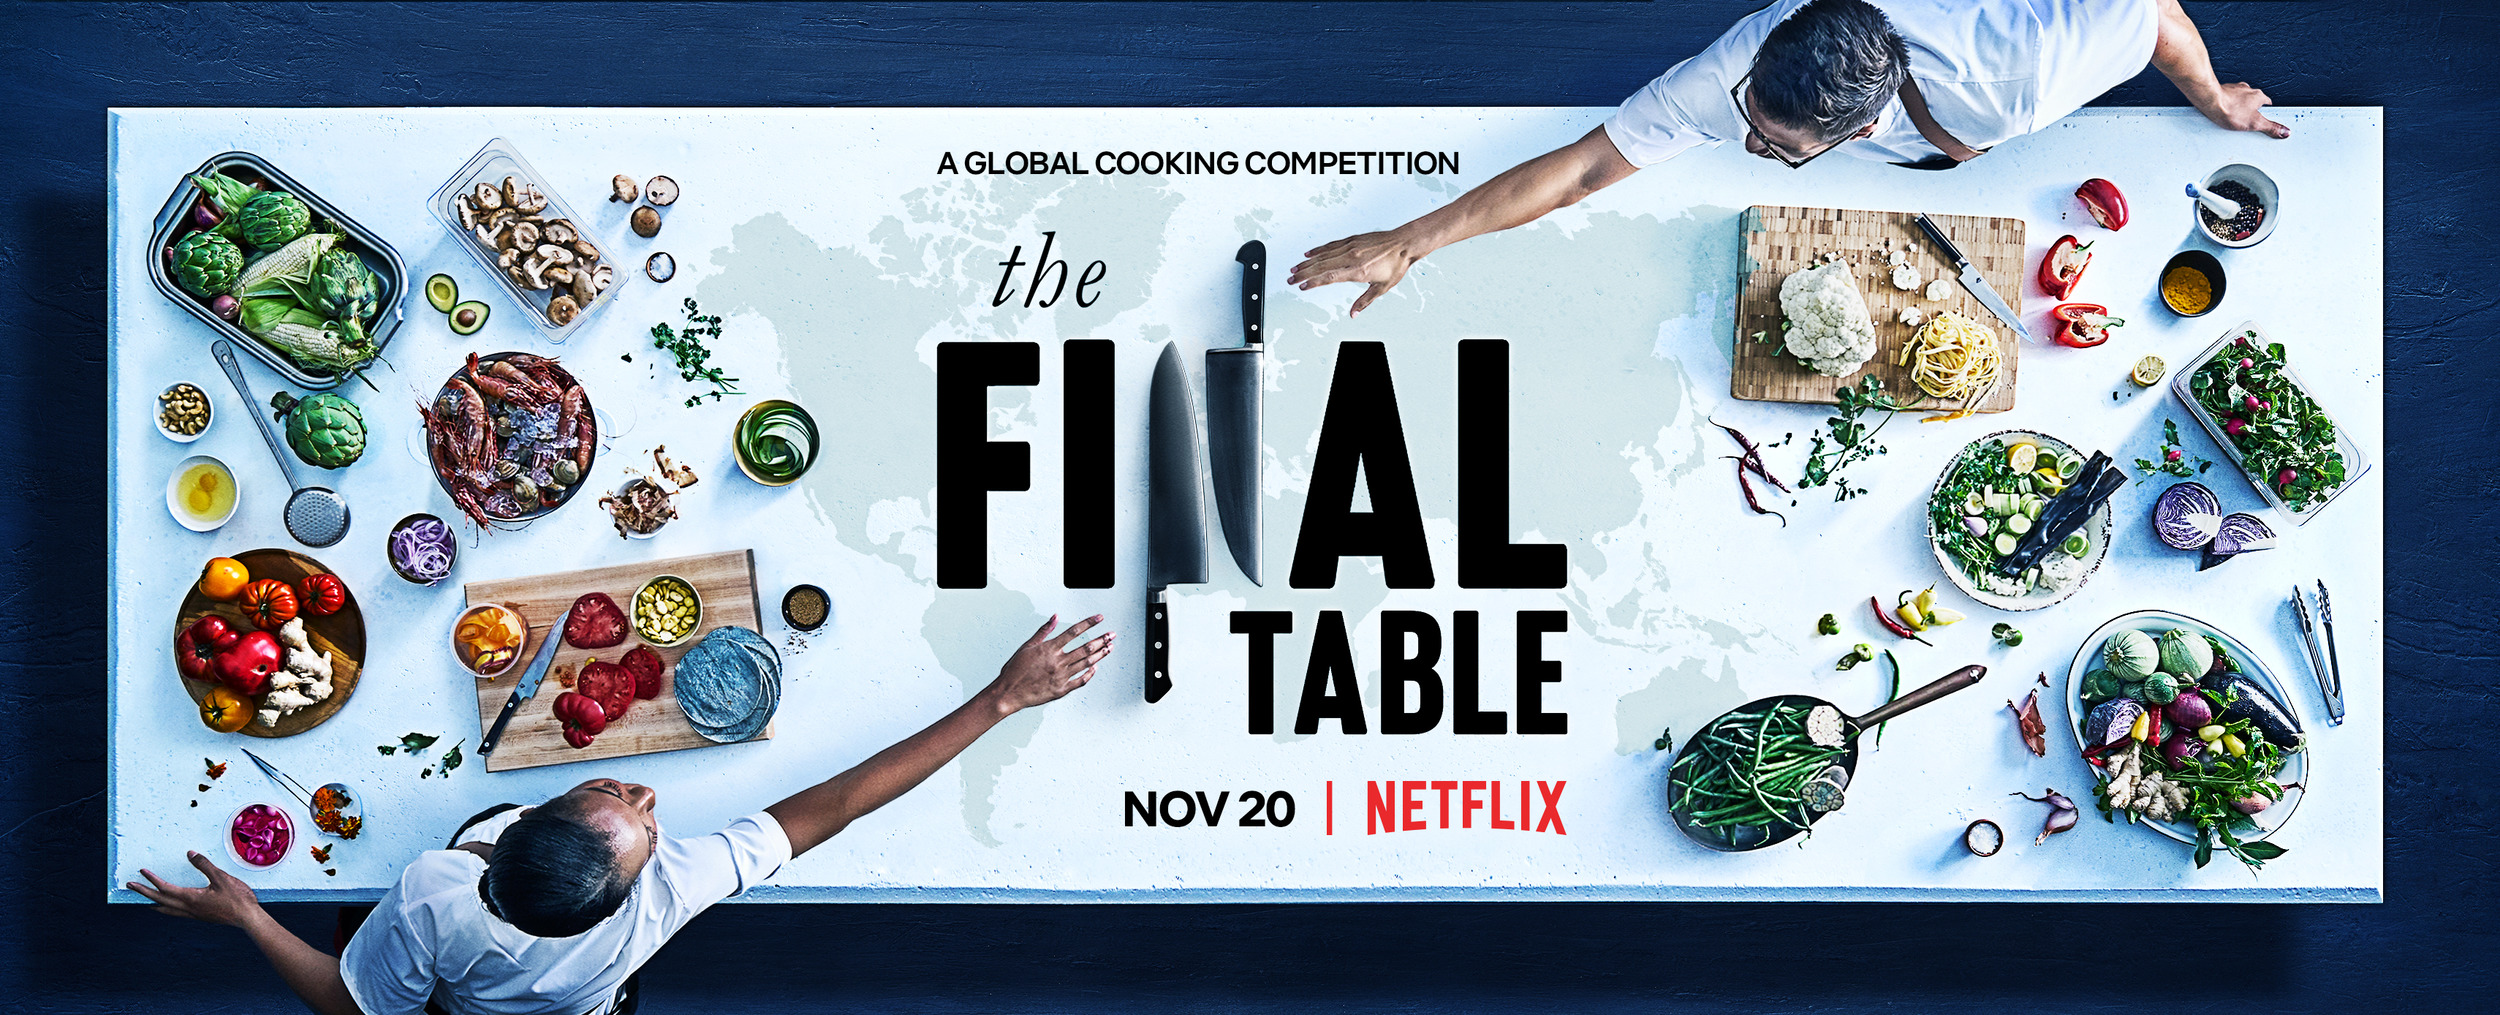 Mega Sized TV Poster Image for The Final Table (#2 of 3)